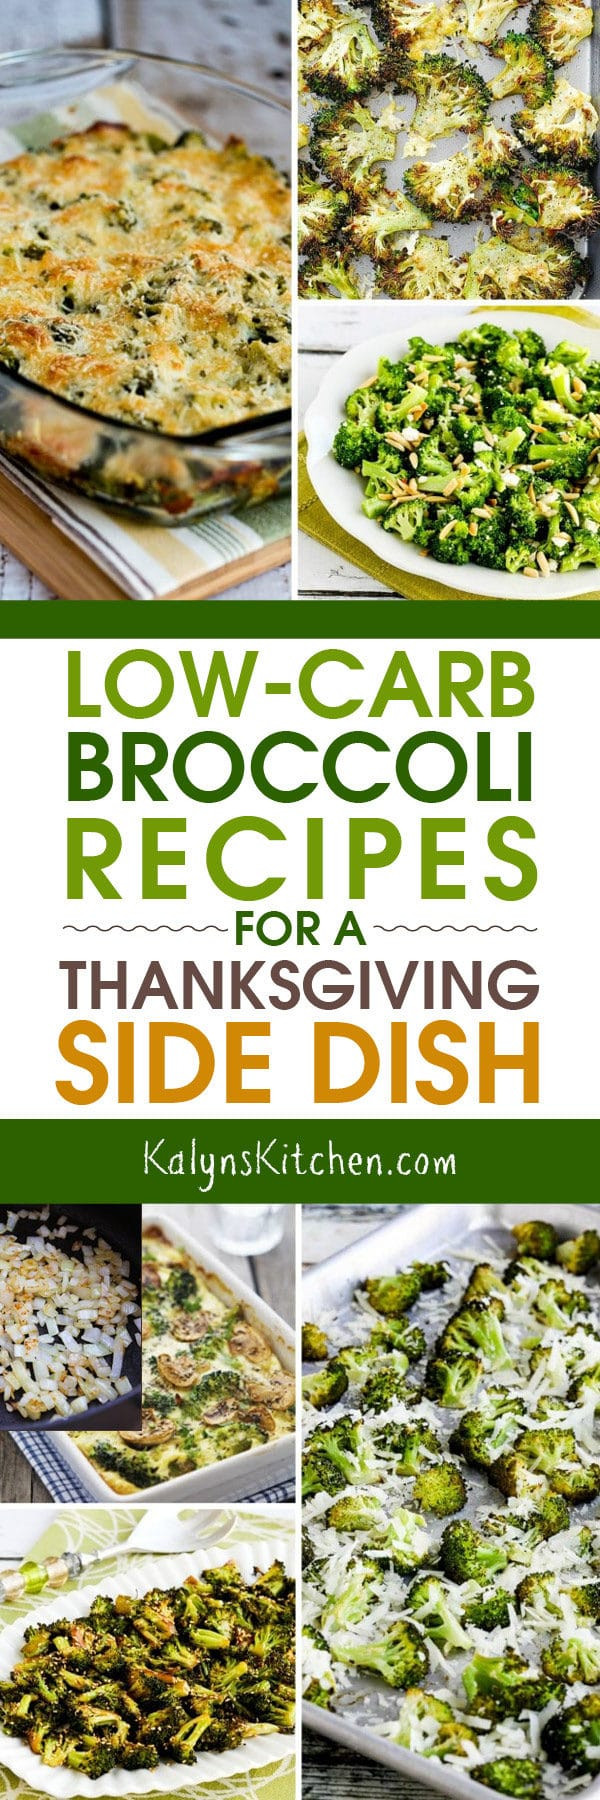 Low Carb Thanksgiving Side Dishes
 Low Carb Broccoli Recipes for a Thanksgiving Side Dish